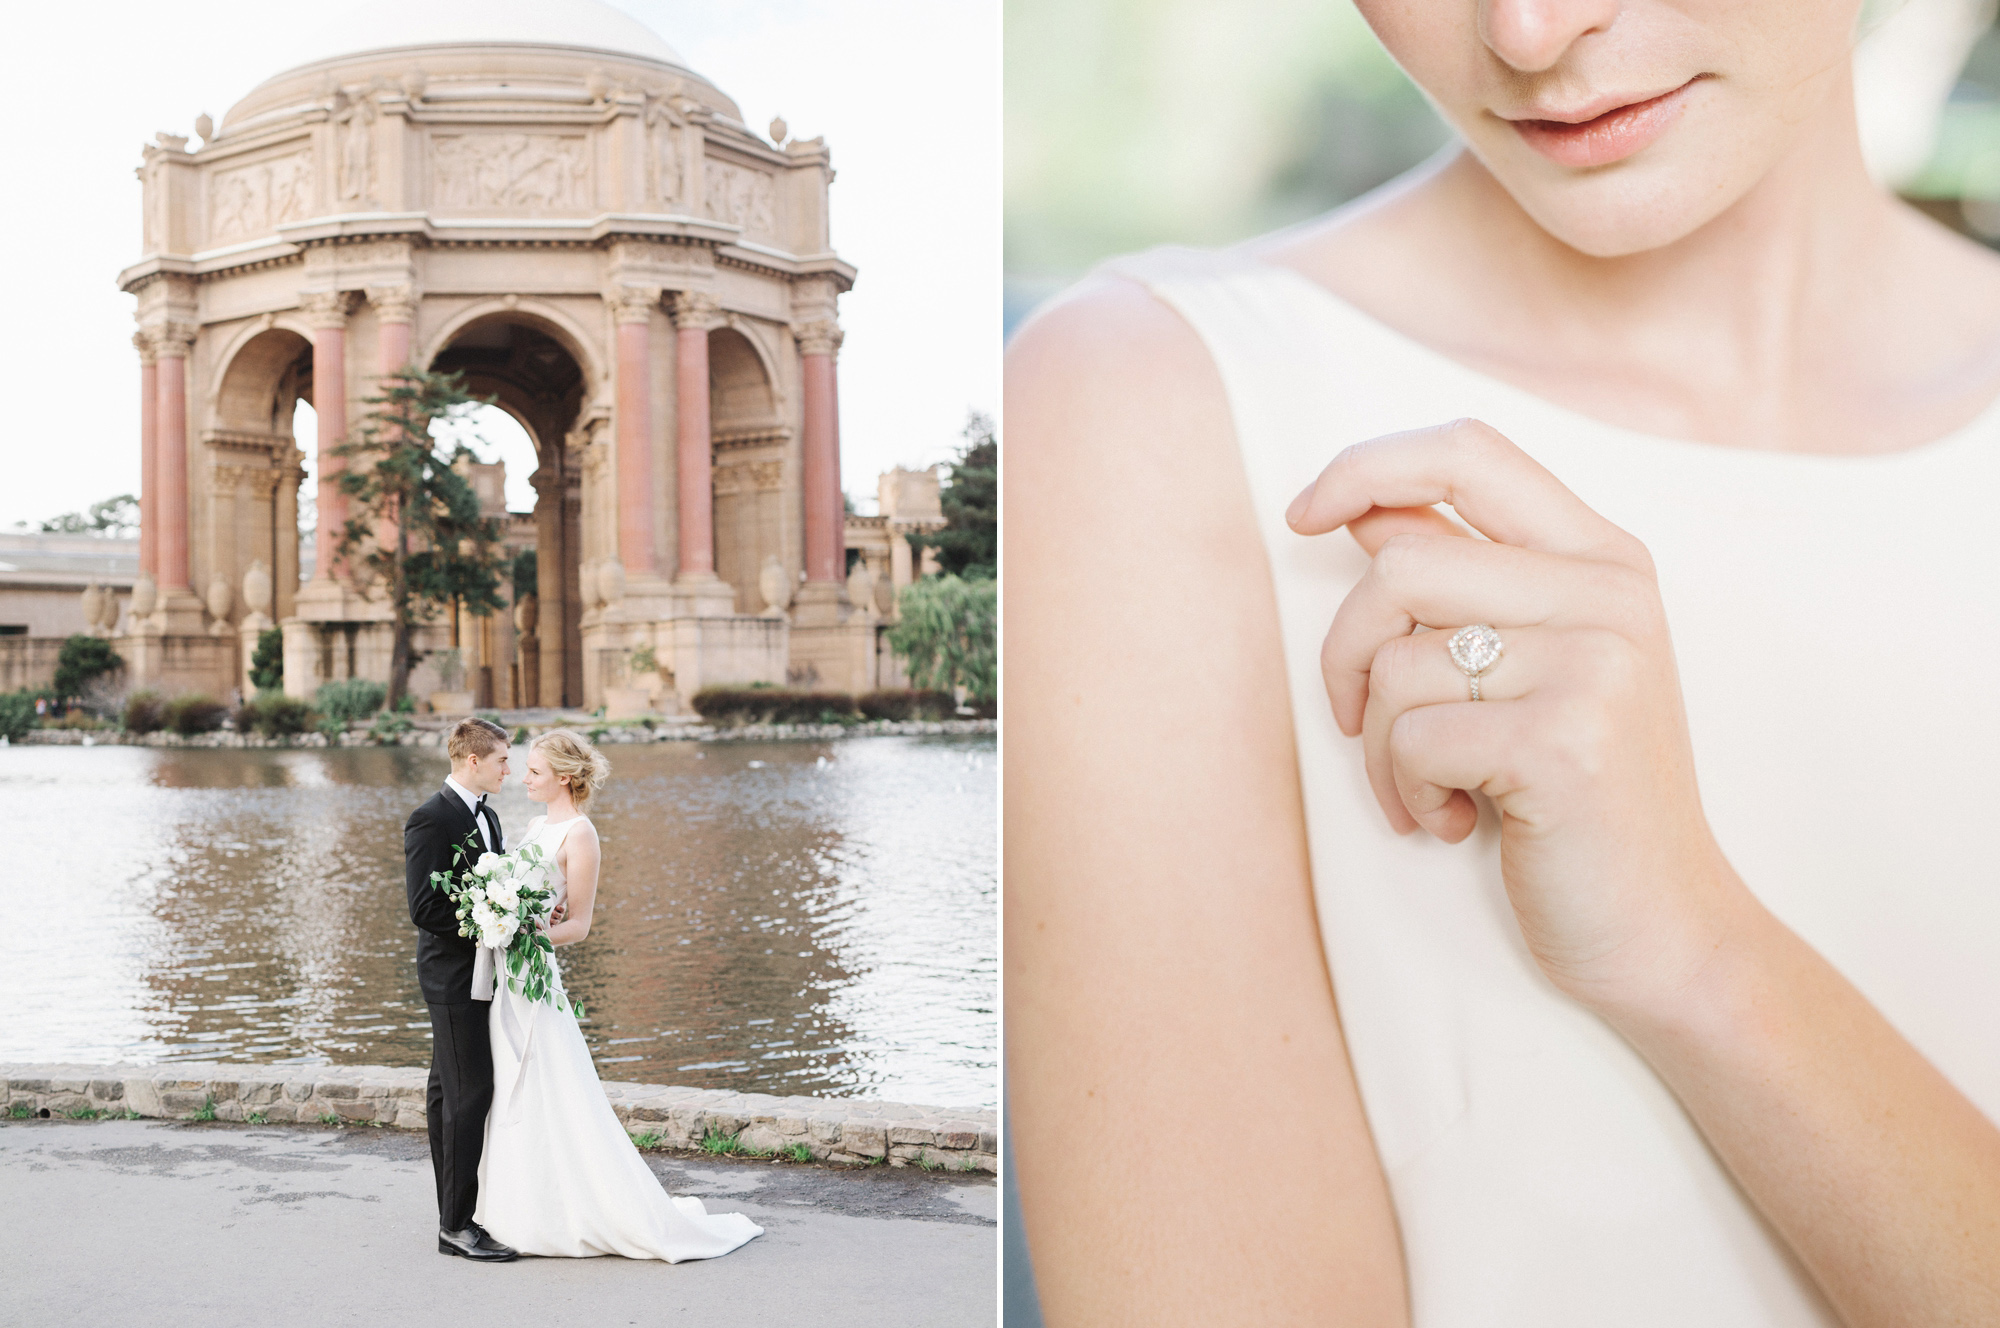 Wedding portraits in front of the Palace of Fine Arts in San Francisco.